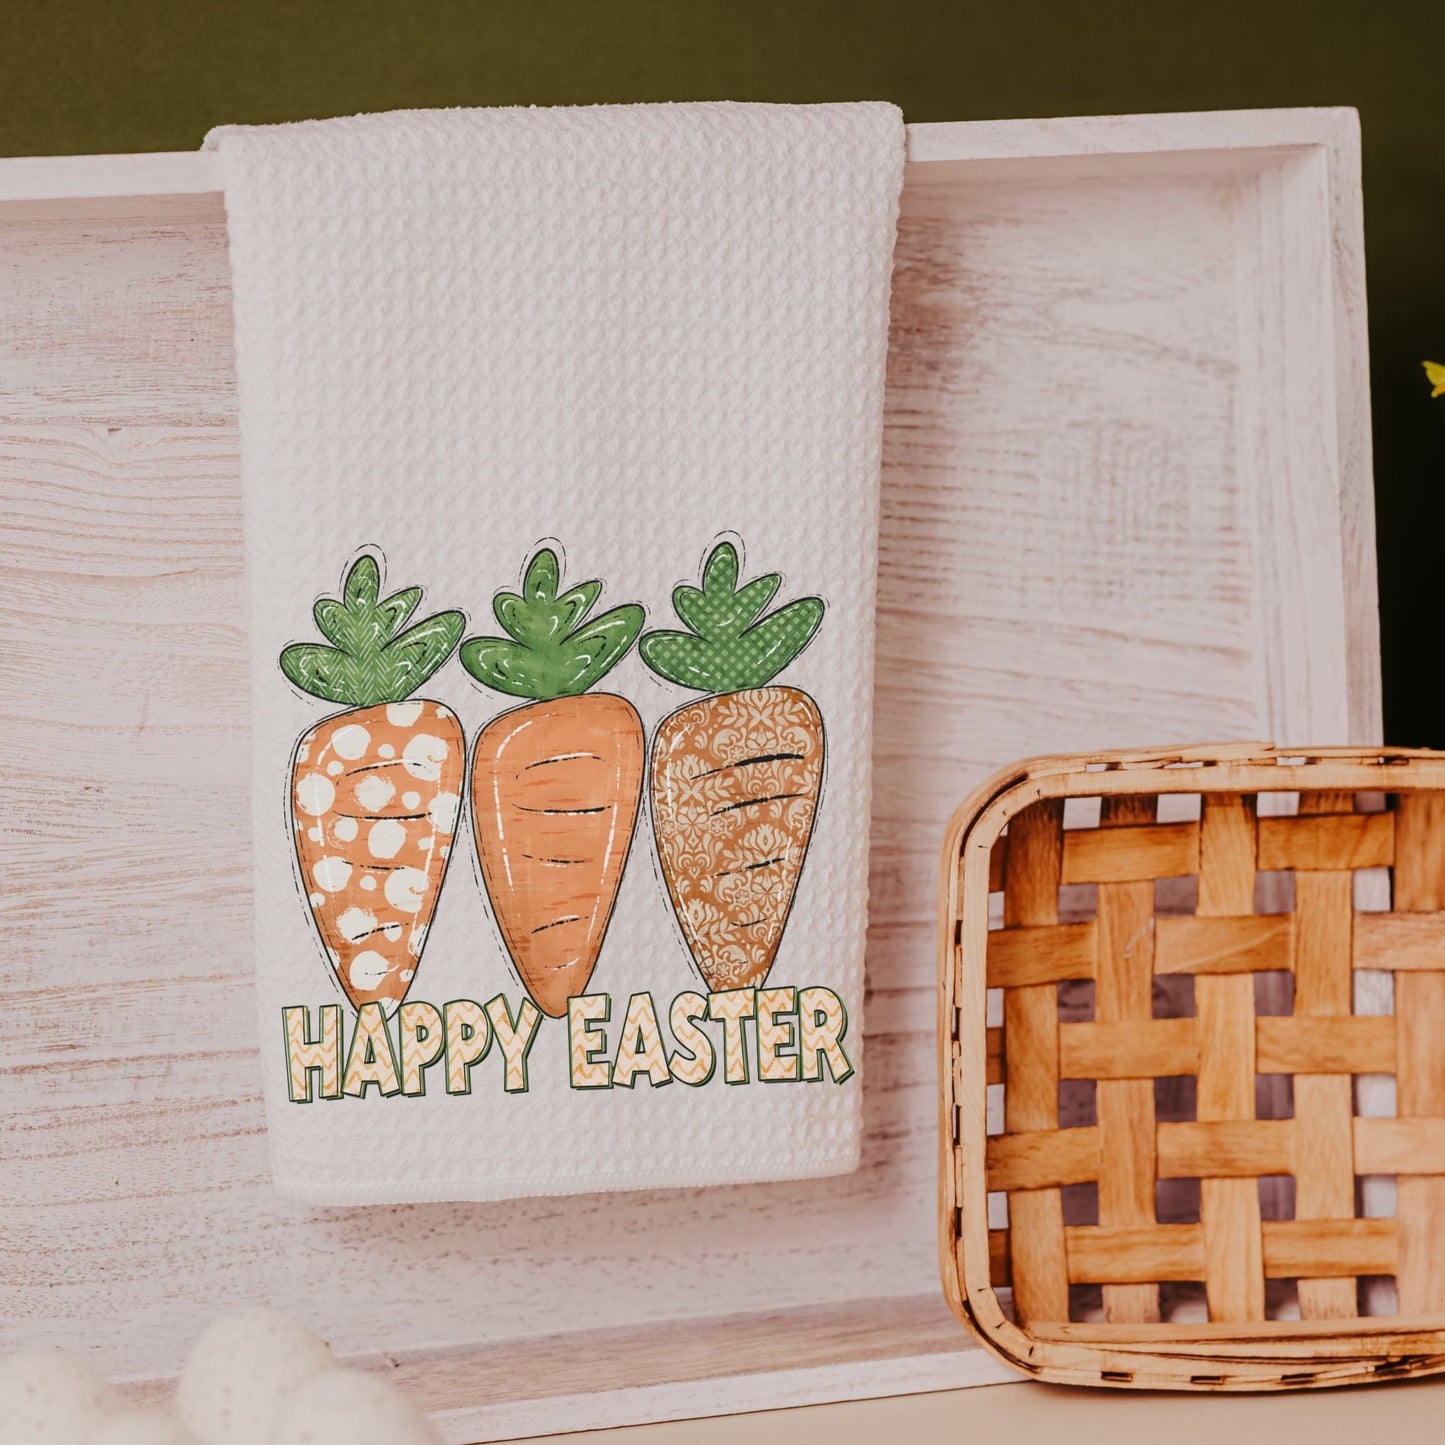 Happy Easter kitchen towels